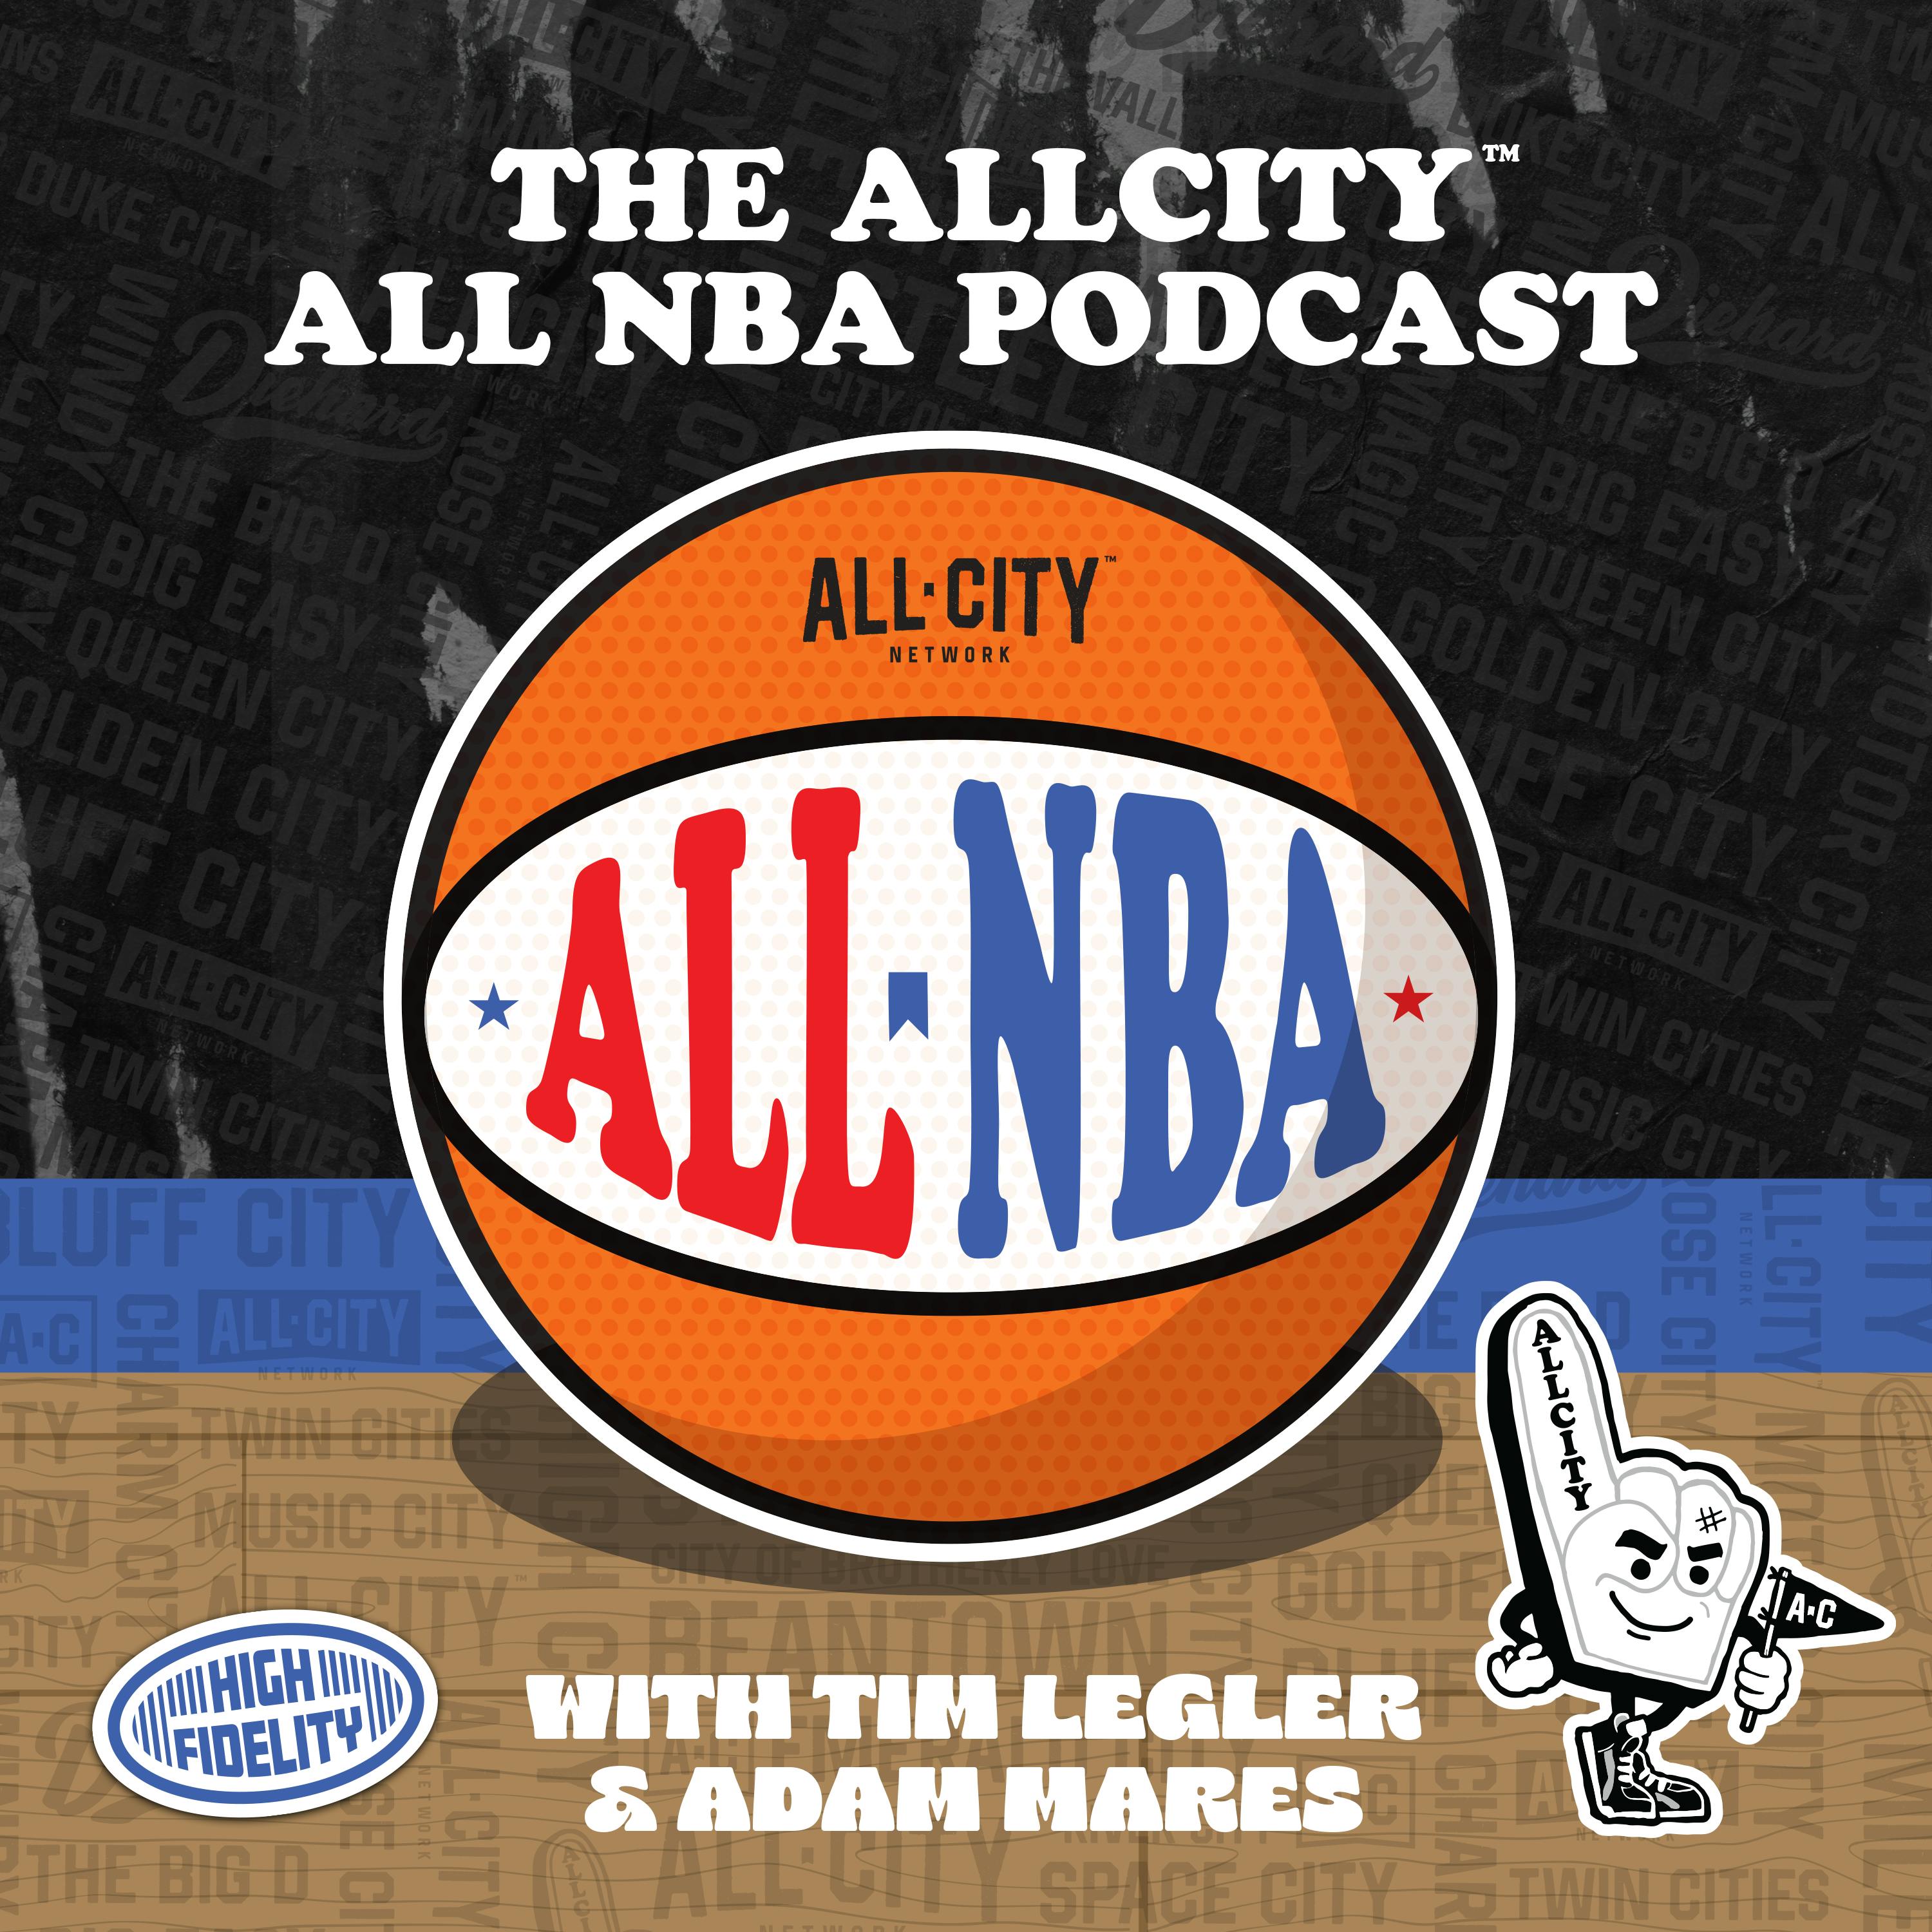 The ALL NBA Podcast: How the Pacers can beat the Celtics | Eastern Conference Finals preview